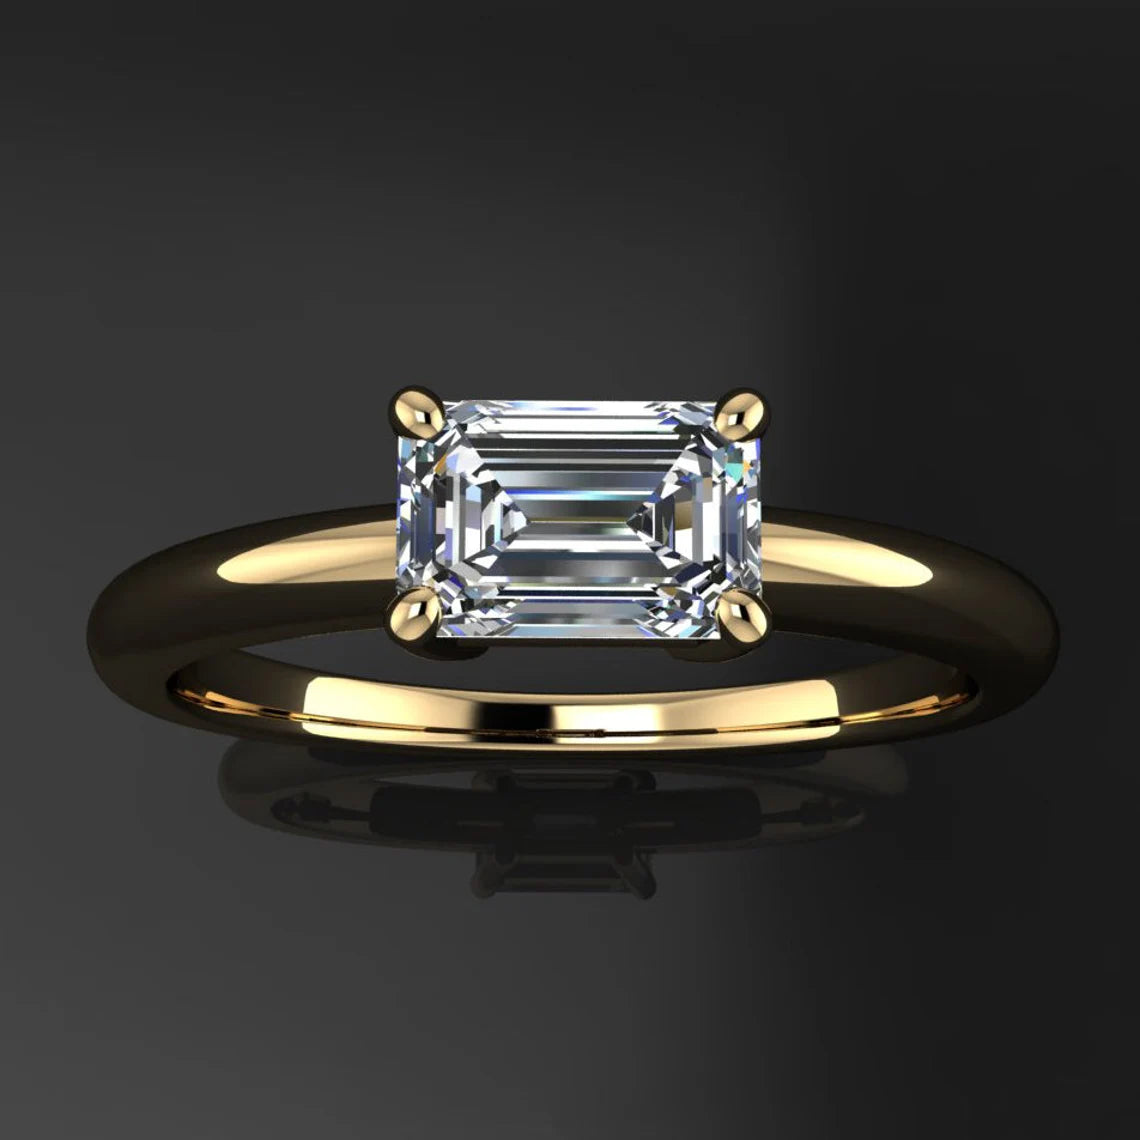 india ring – emerald cut NEO moissanite ring, east west ring - J Hollywood Designs